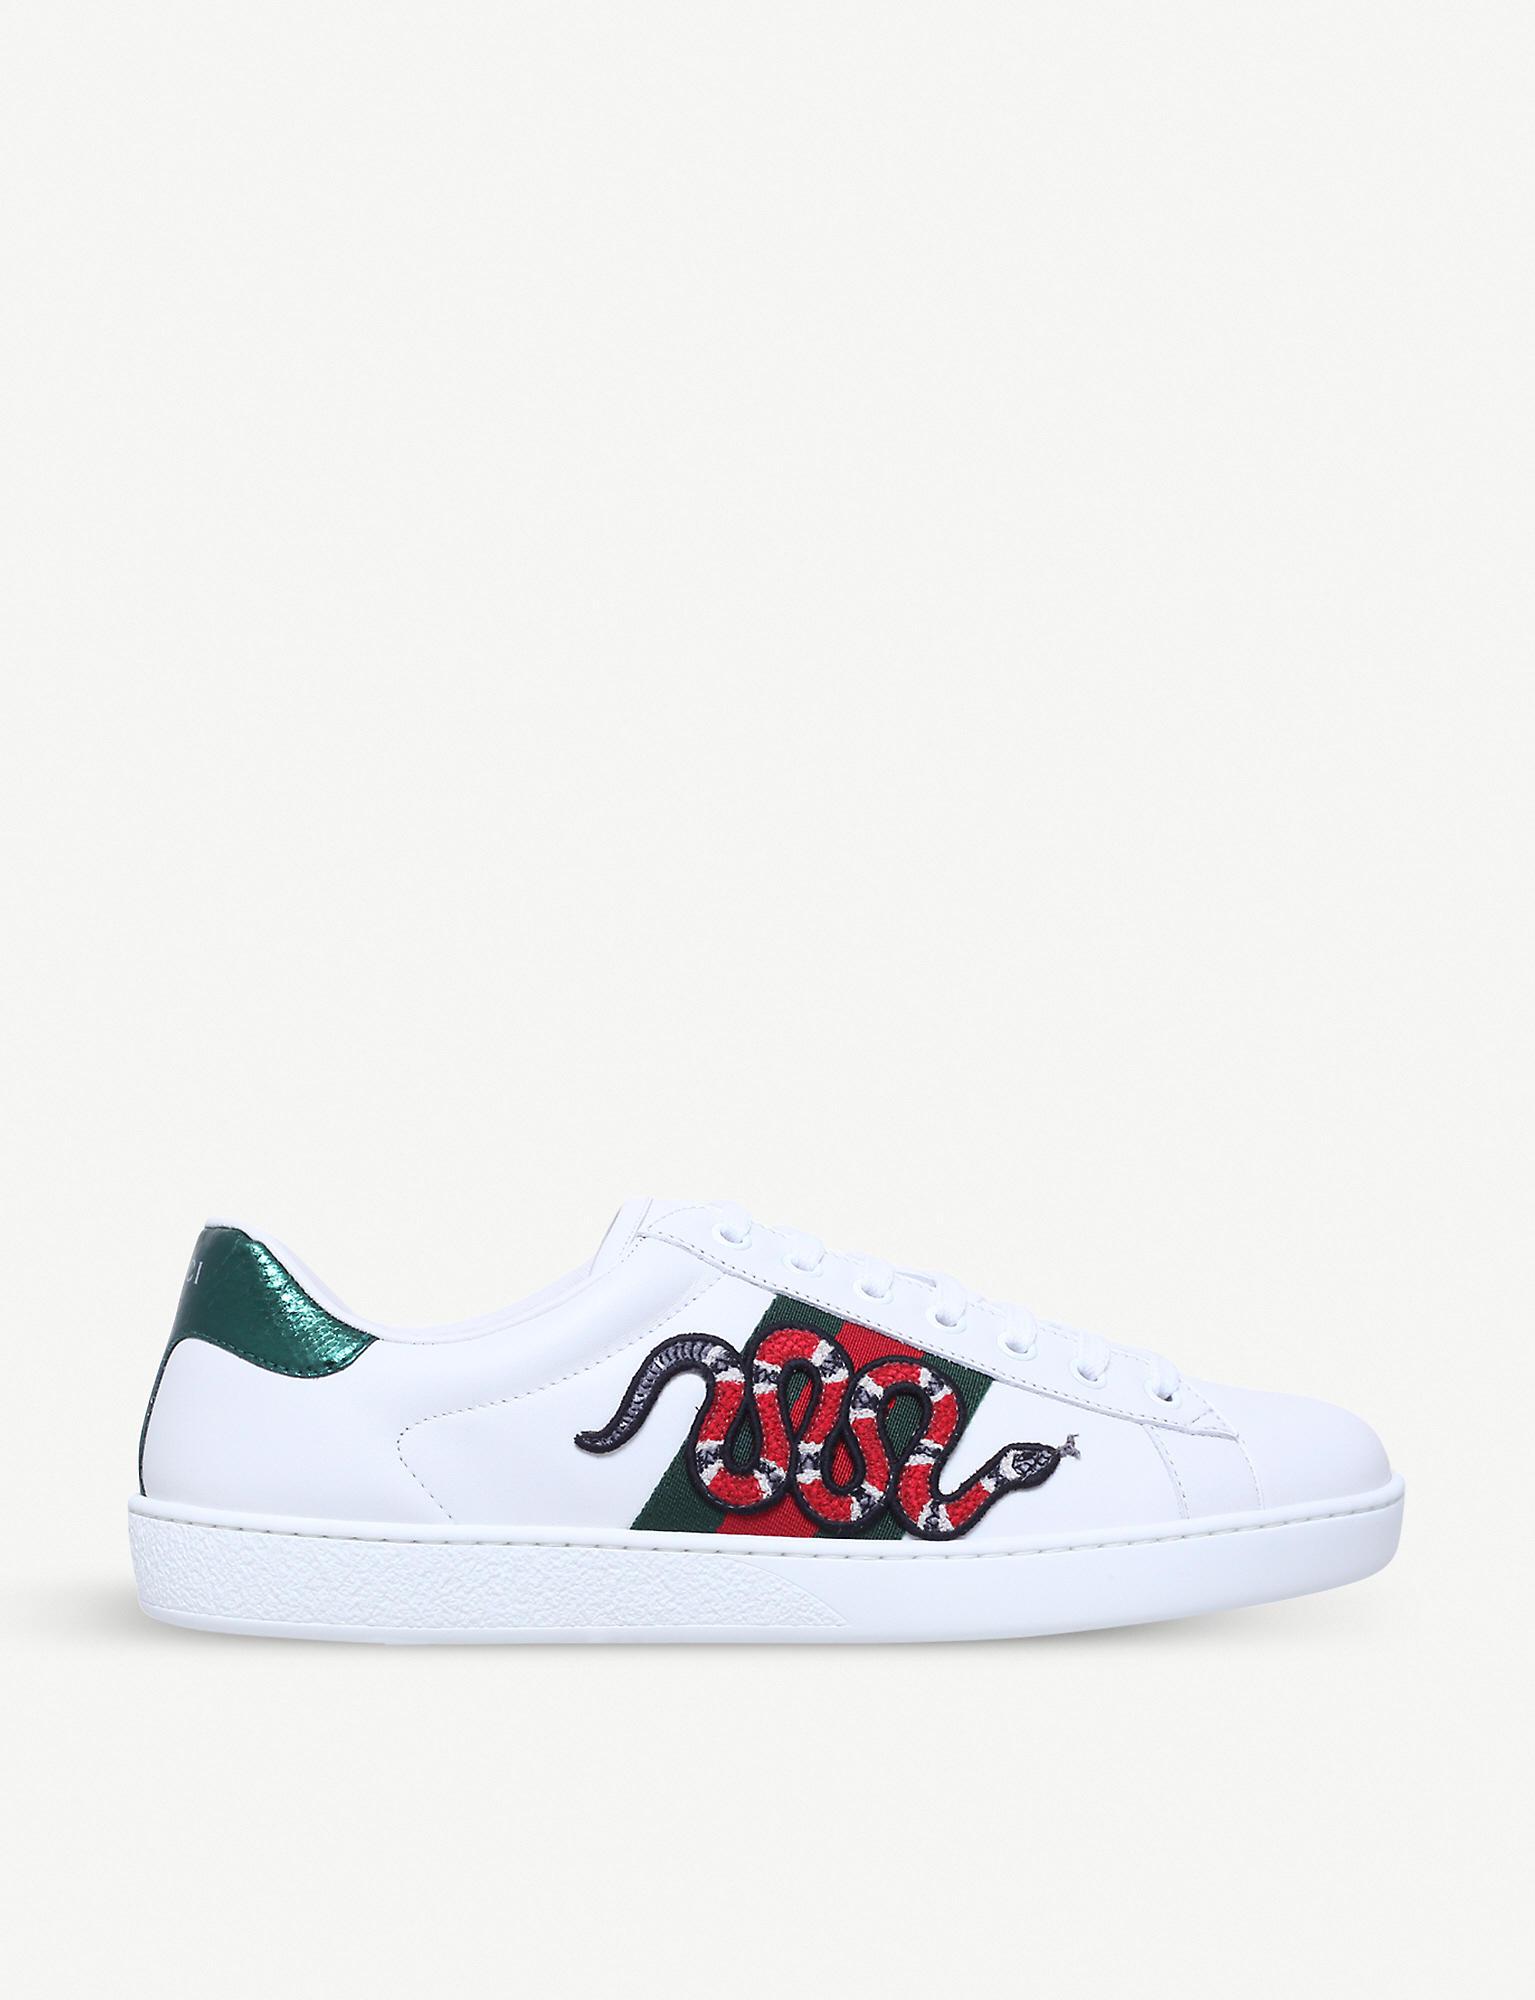 mens gucci snake shoes